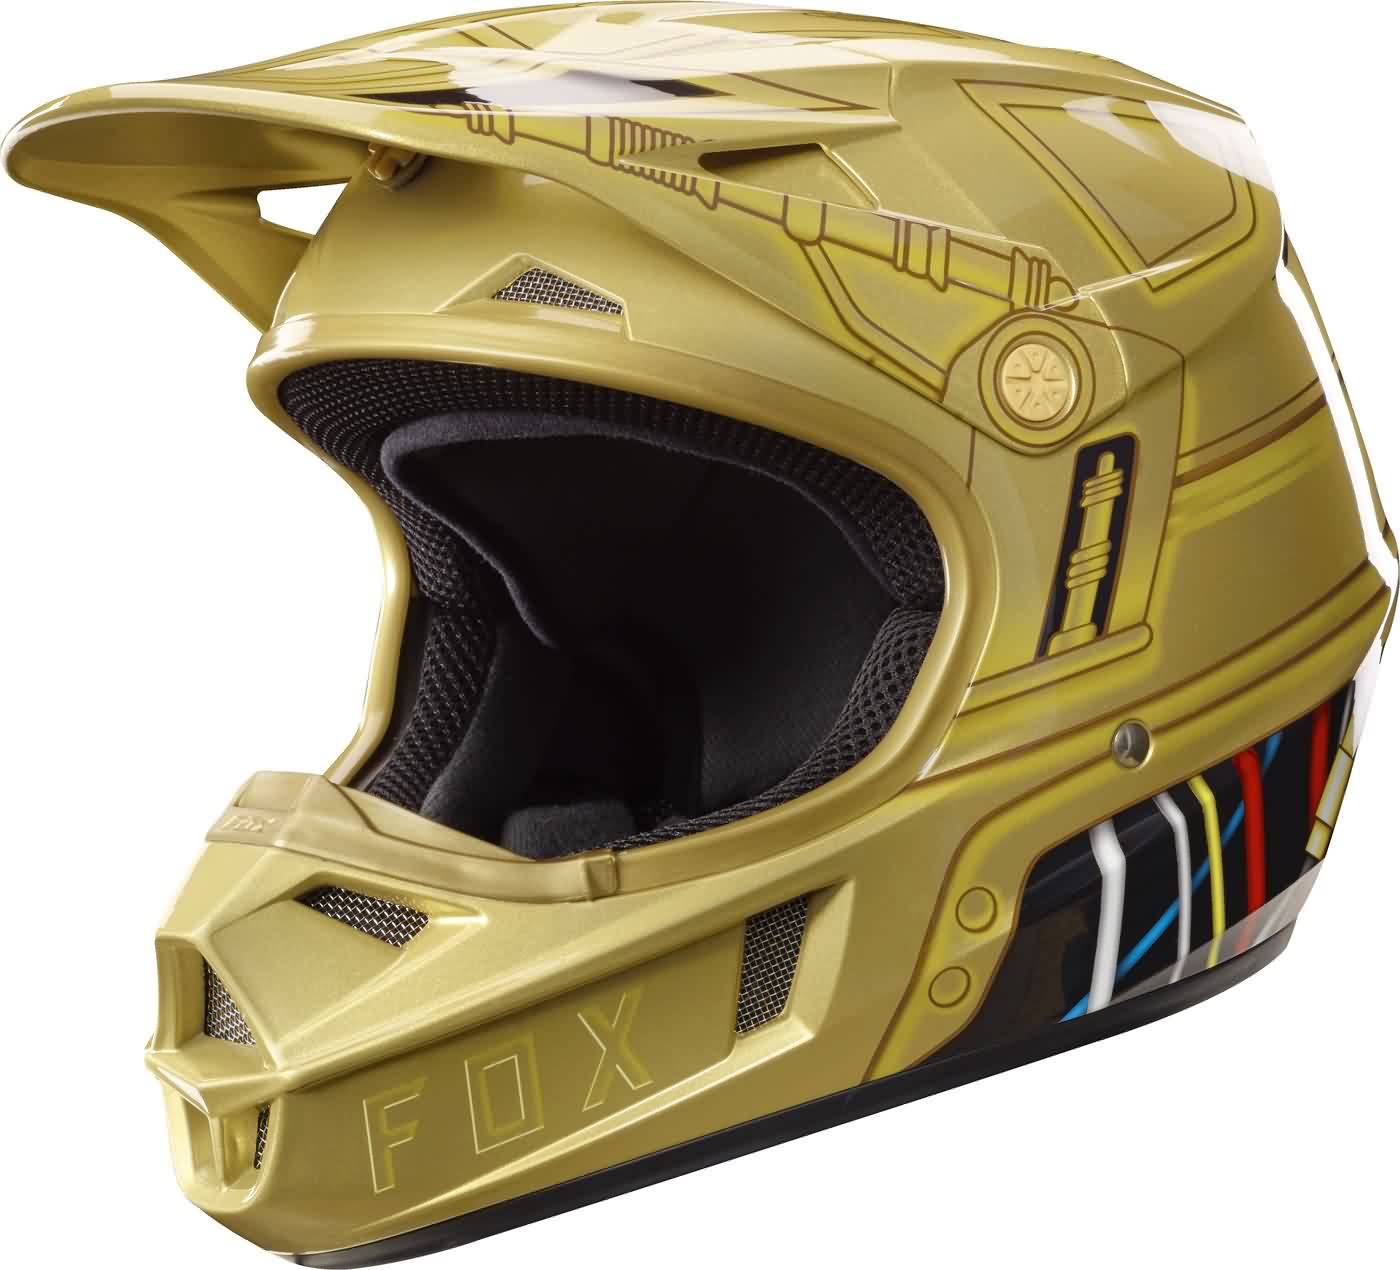 Fox Racing 2016 Star Wars C3PO Helmets Limited Edition Overview